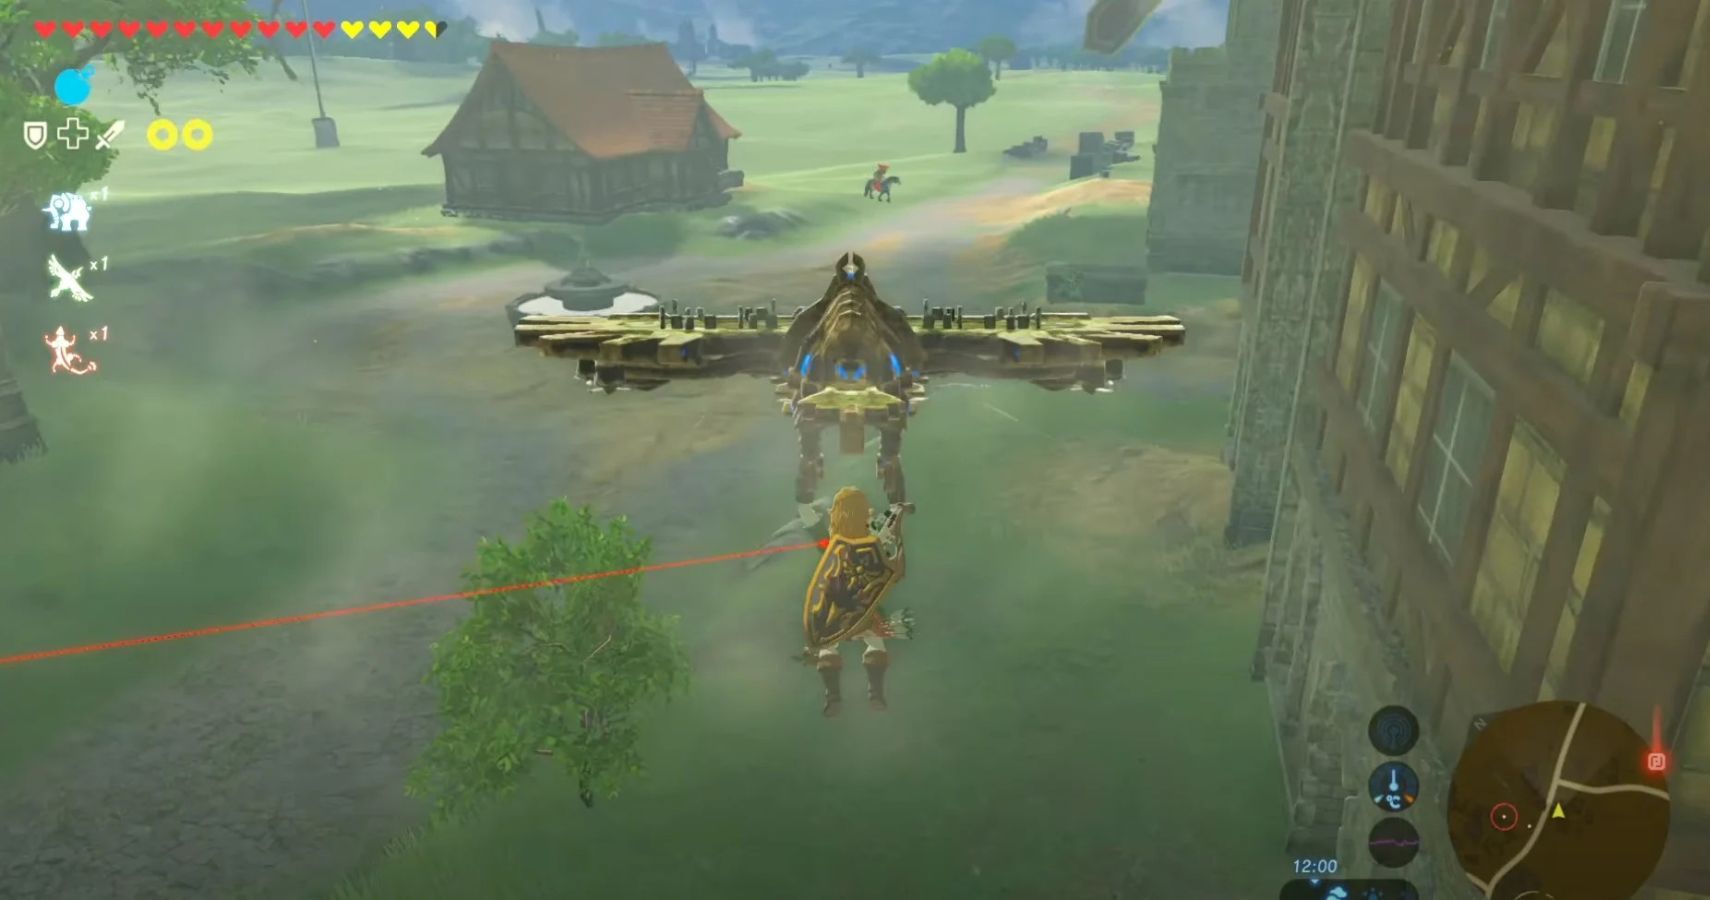 Modder Rebuilds Hyrule In Breath Of The Wild Using Age Of Calamity Buildings